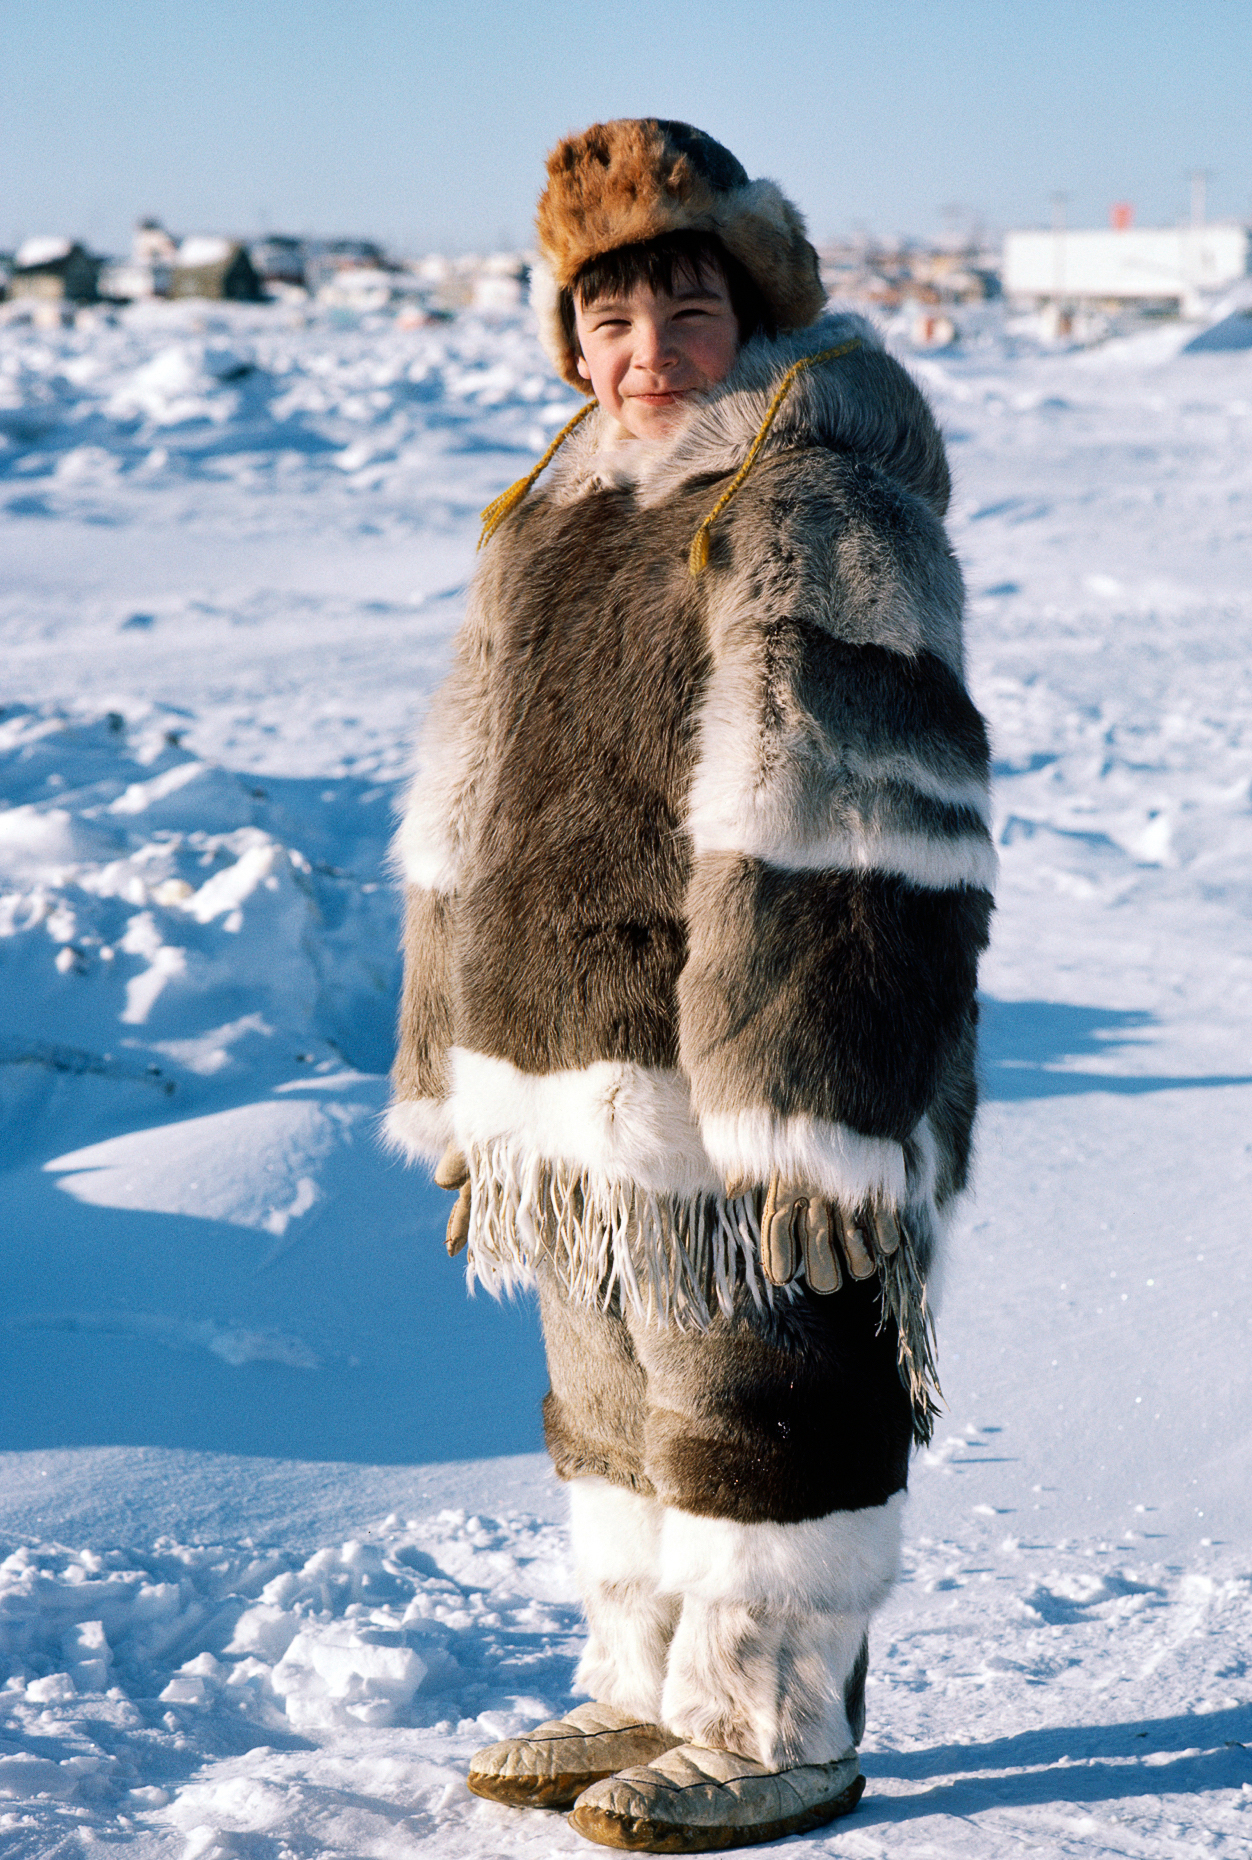 Boy dressed in traditional Inuit skin clothing, Iqaluit, Baffin 